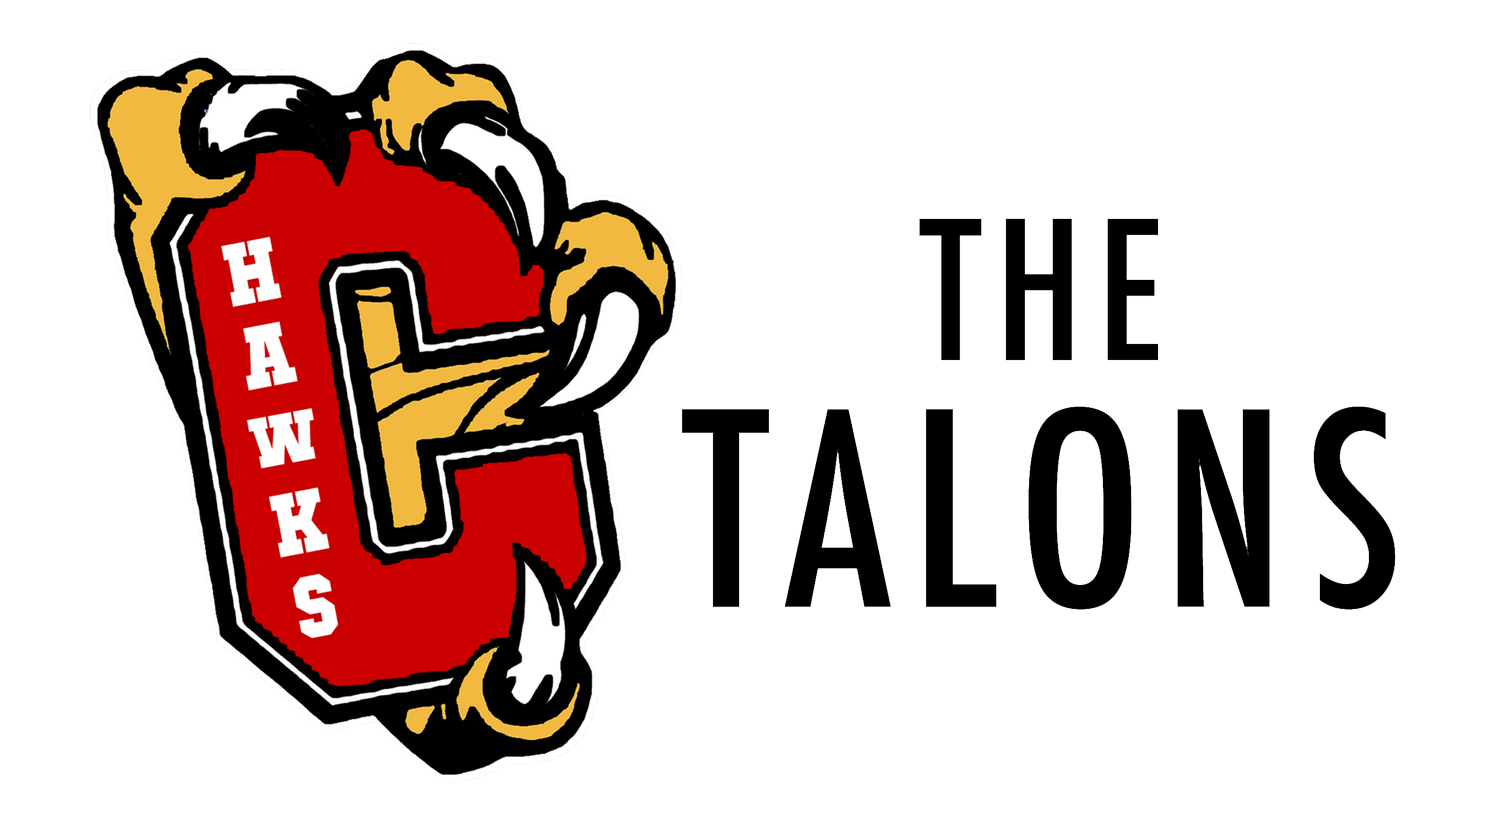 The Talons